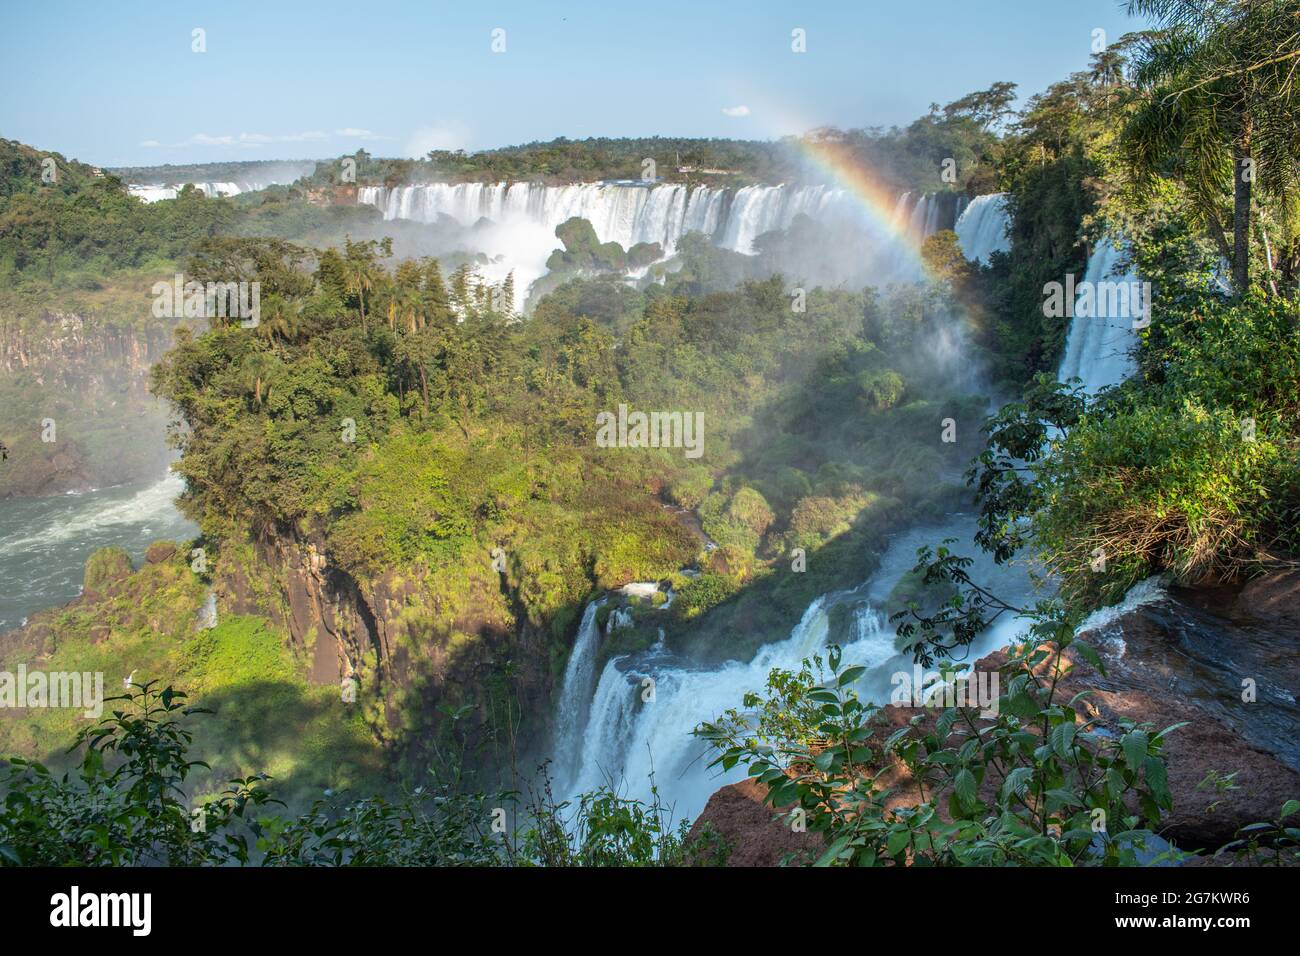 Scenic view of Iguazu Falls as seen from the Argentinian side Stock Photo